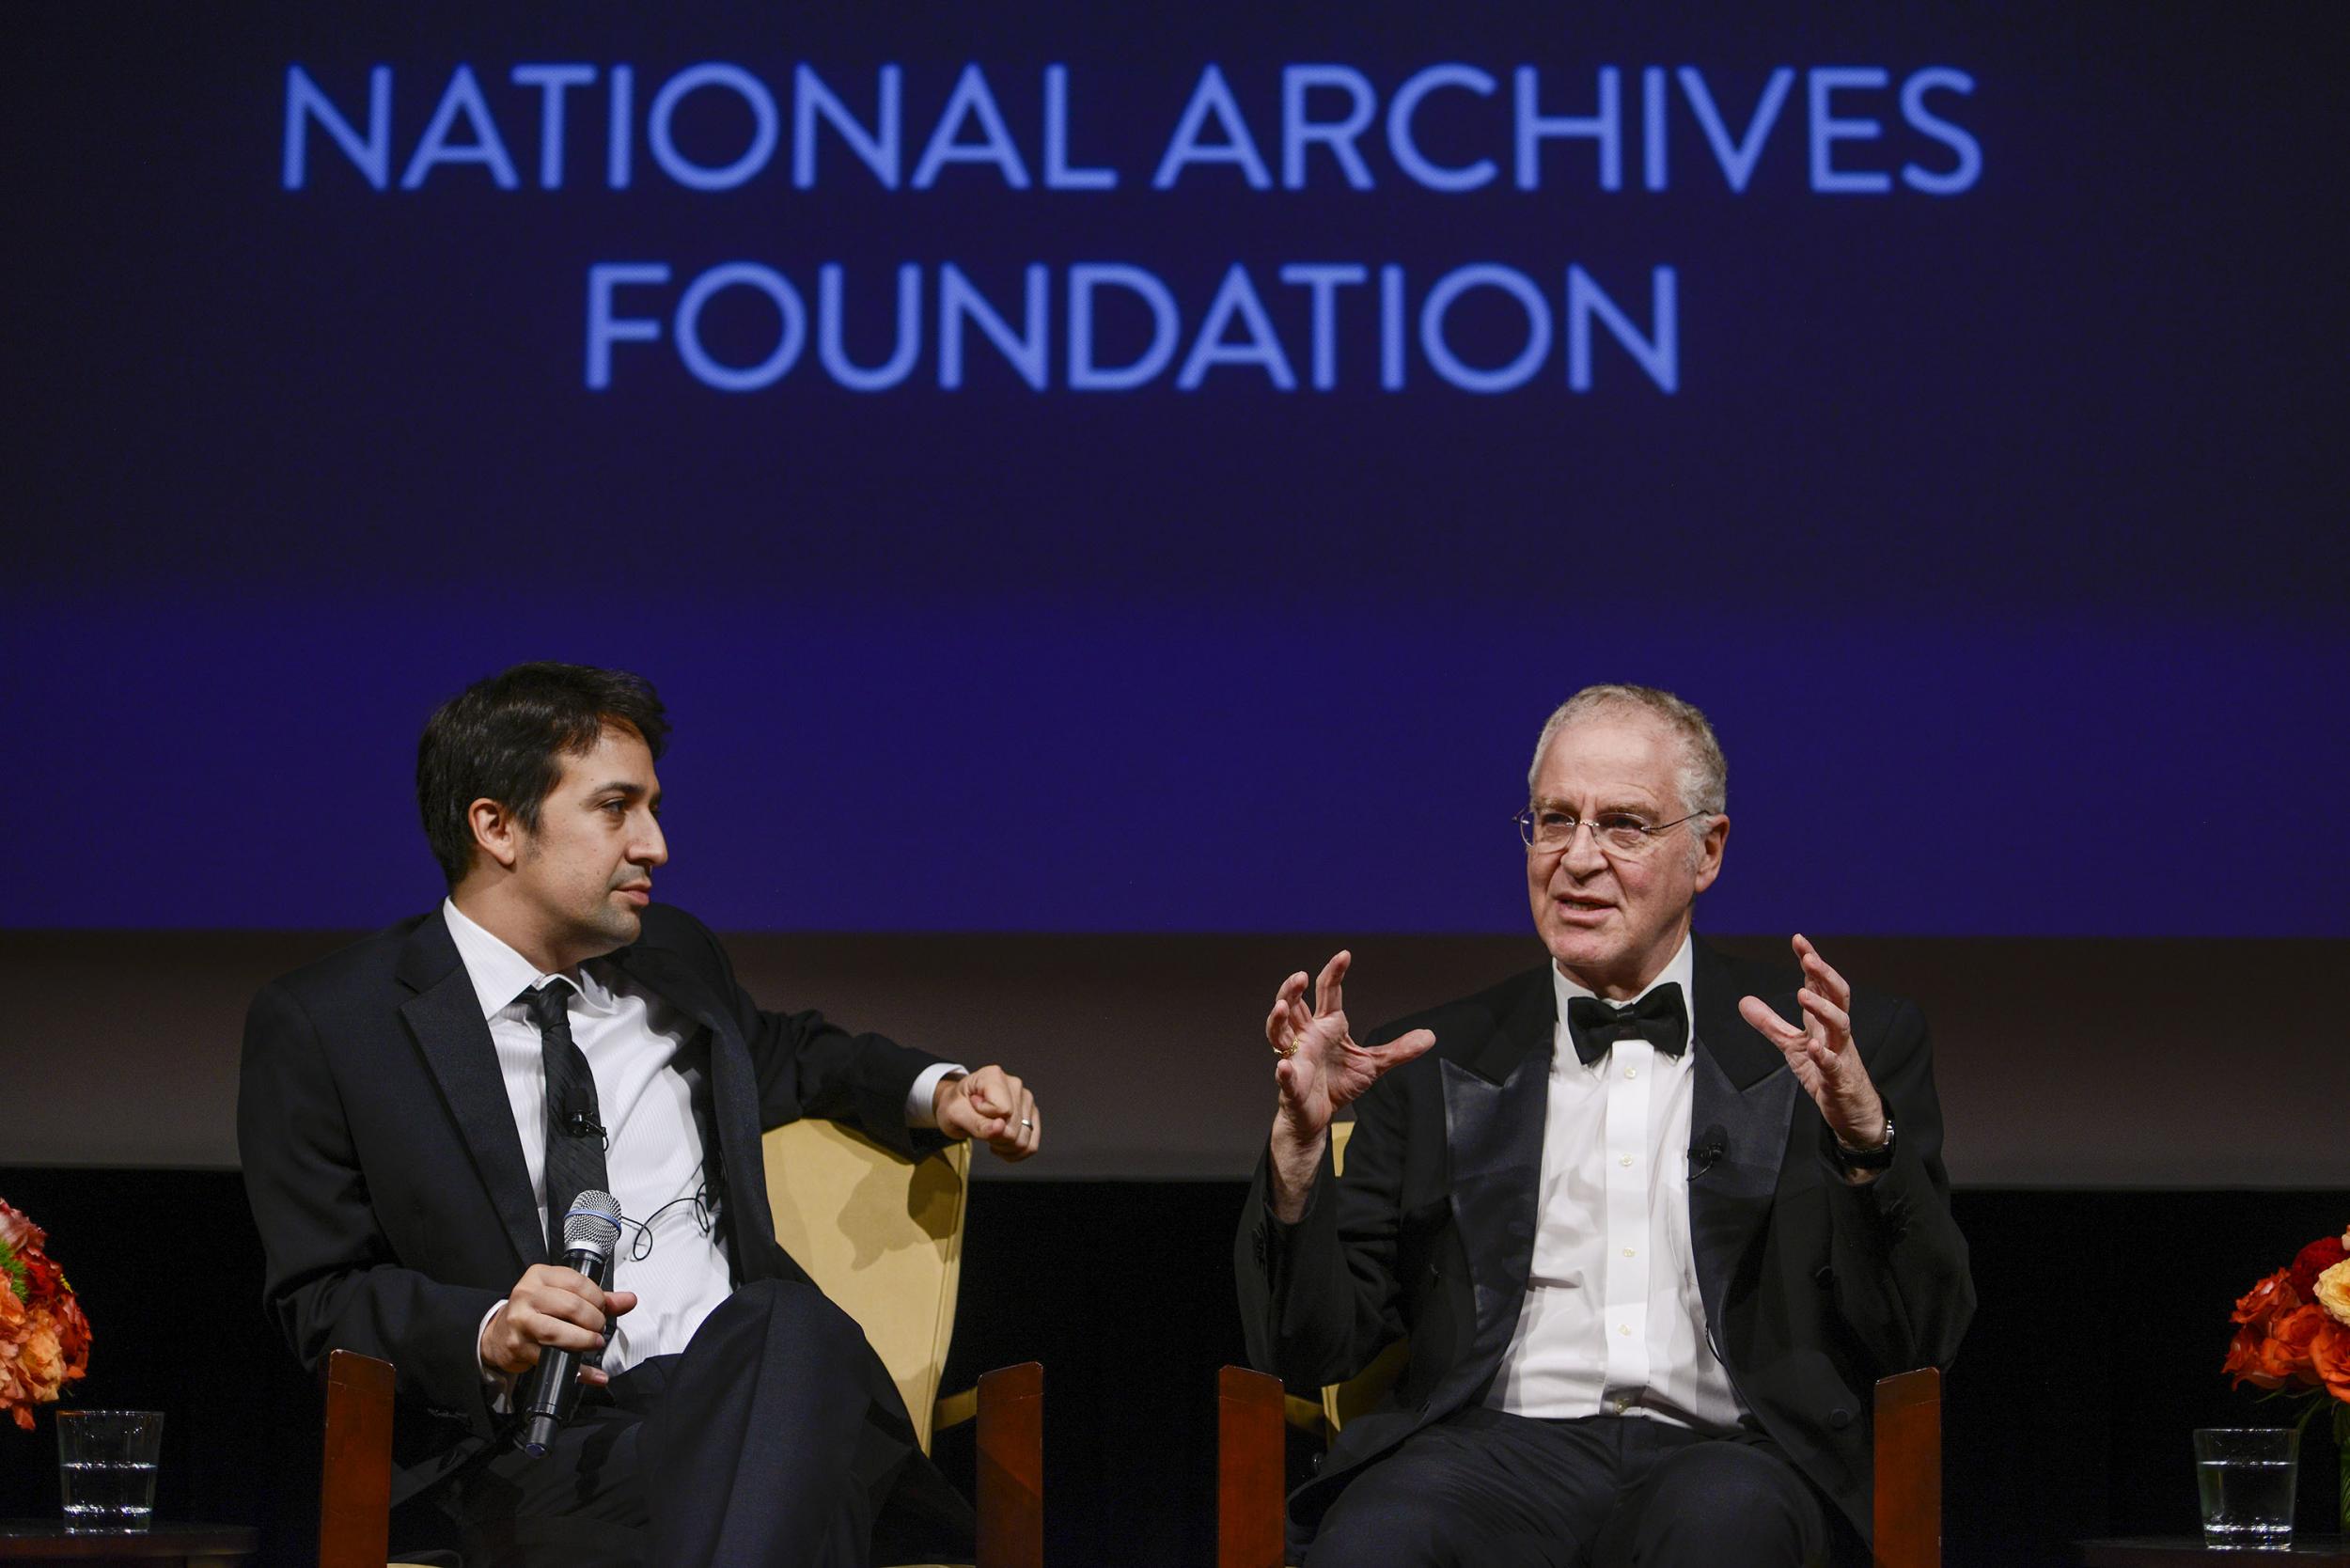 Author Ron Chernow, who consulted for Lin-Manuel Miranda on the "Hamilton" musical, is set to host the 2019 White House Correspondents Association dinner.